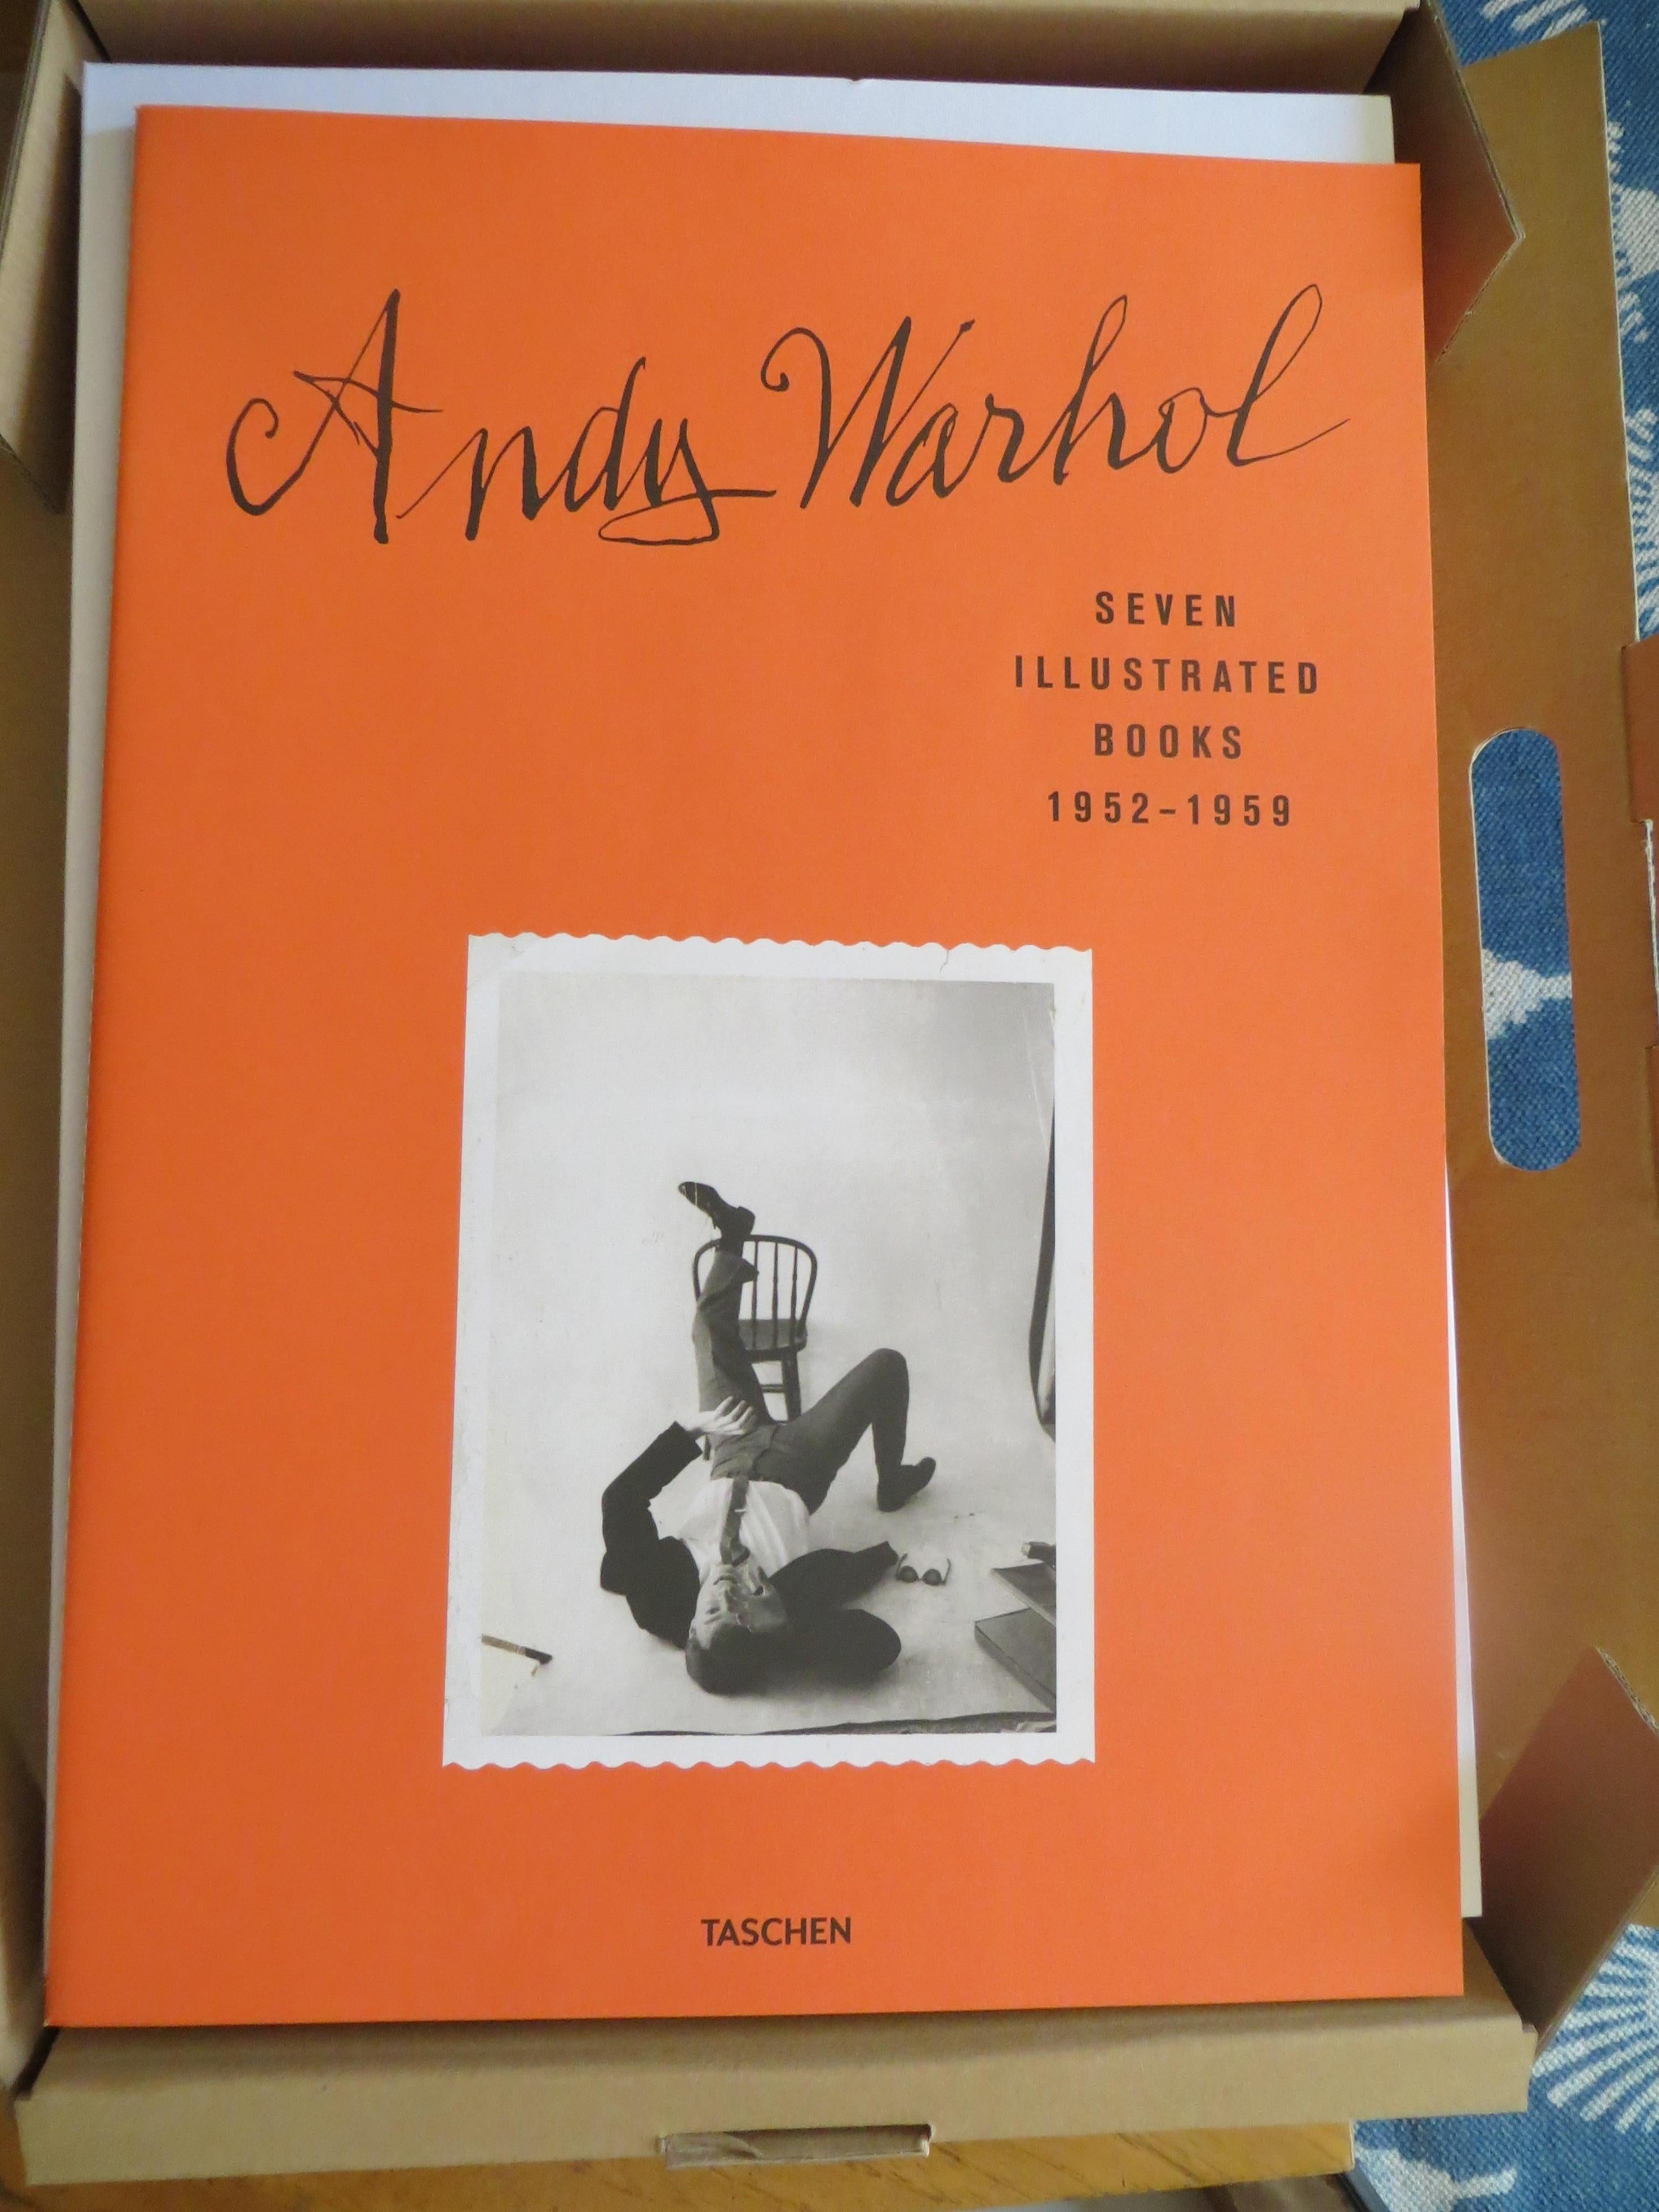 Andy Warhol: Seven Illustrated Books 1952-1959 by Reuel Golden Hardcover Book - Pop Art Art by (after) Andy Warhol